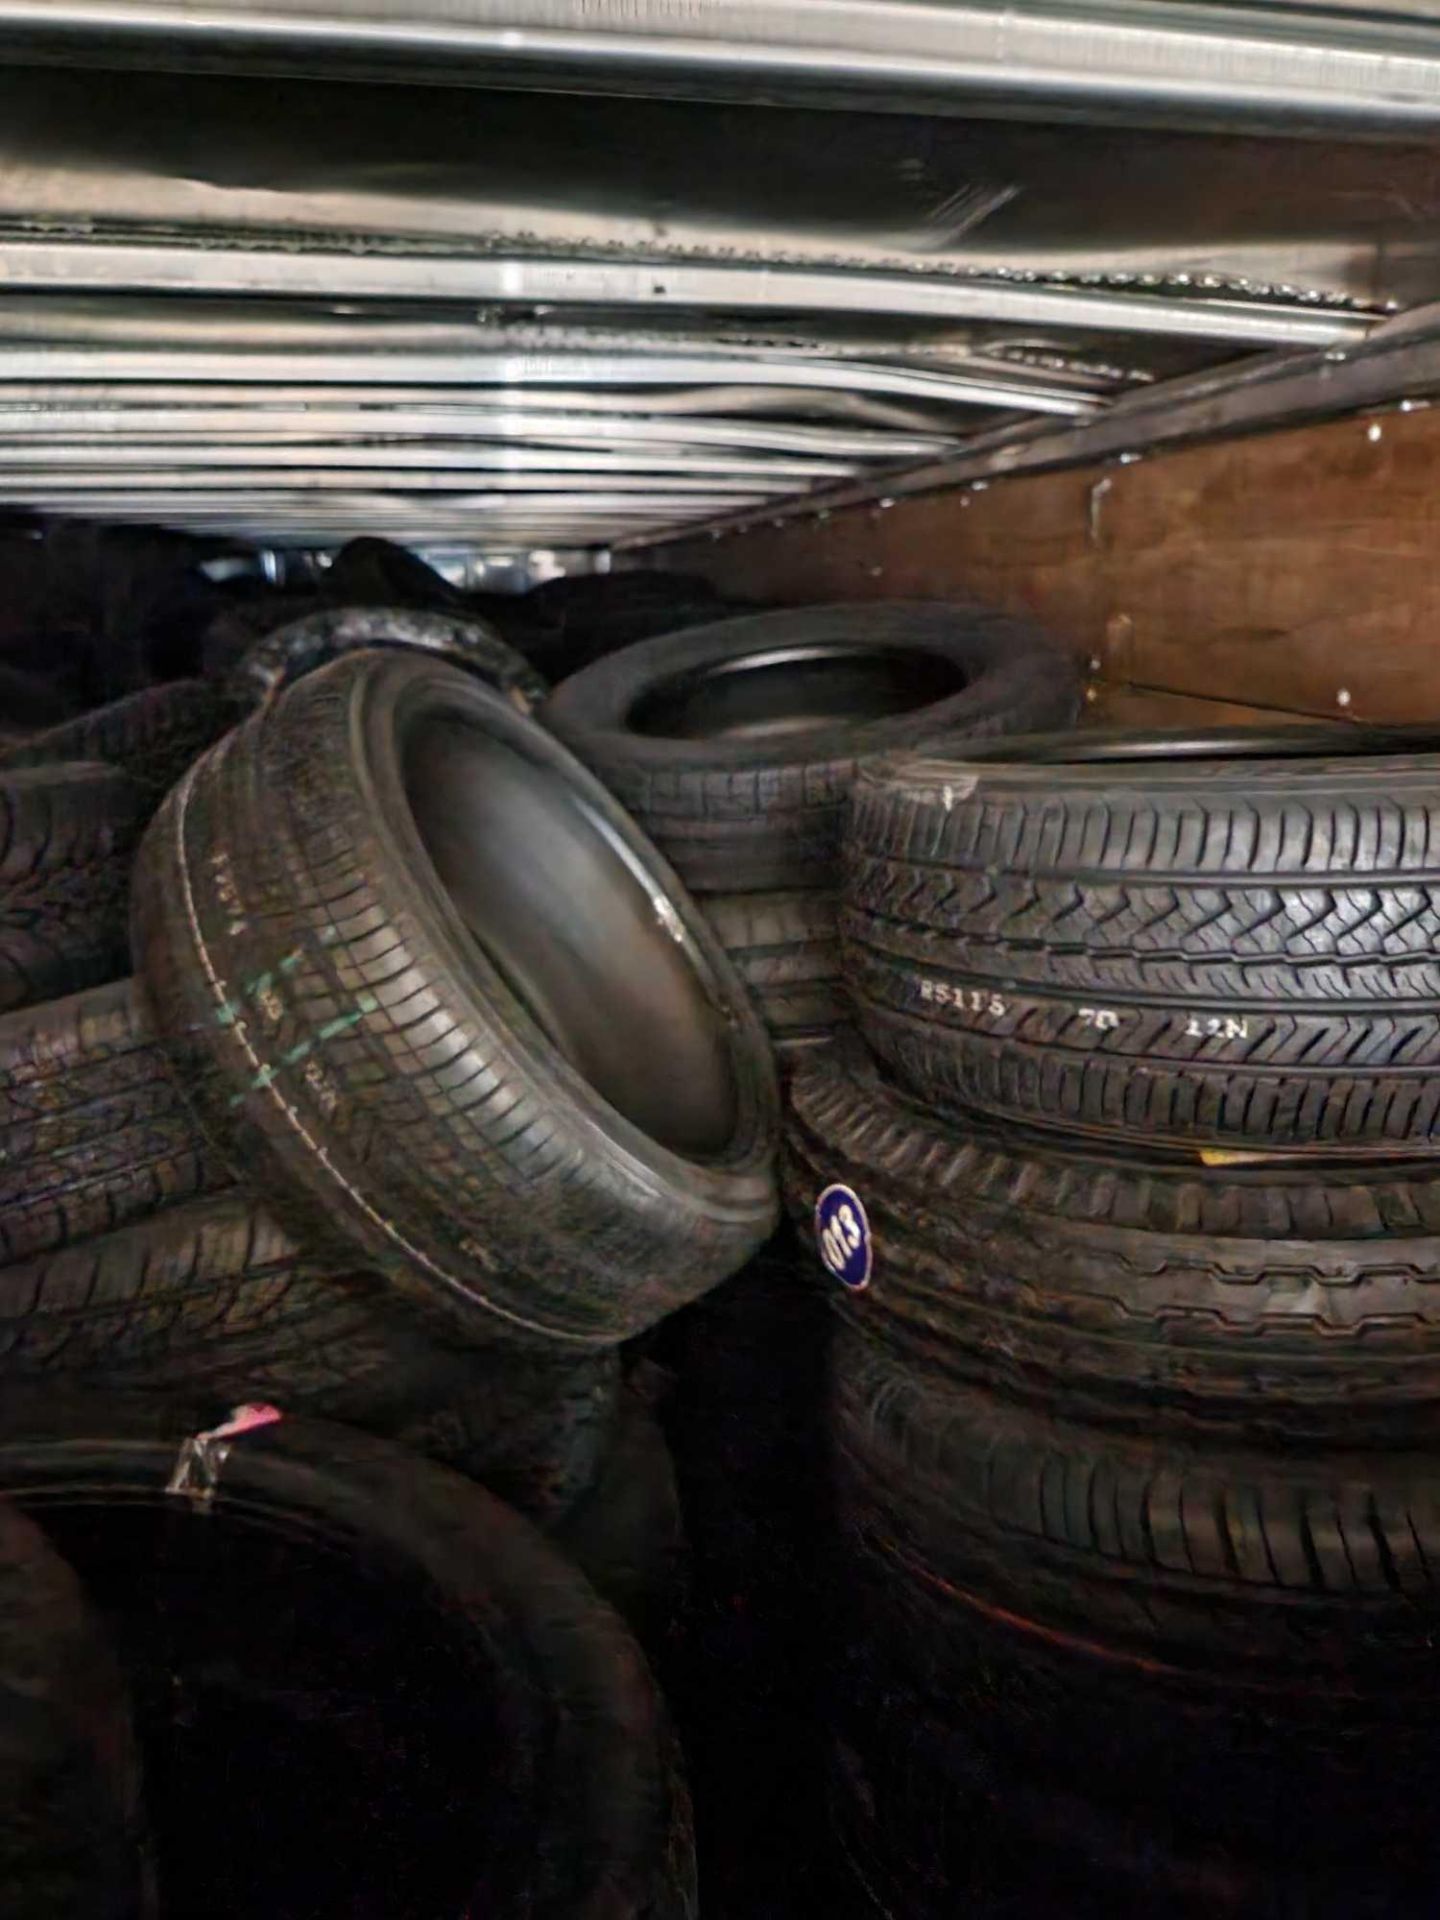 Semi Load of Tires - Image 10 of 11